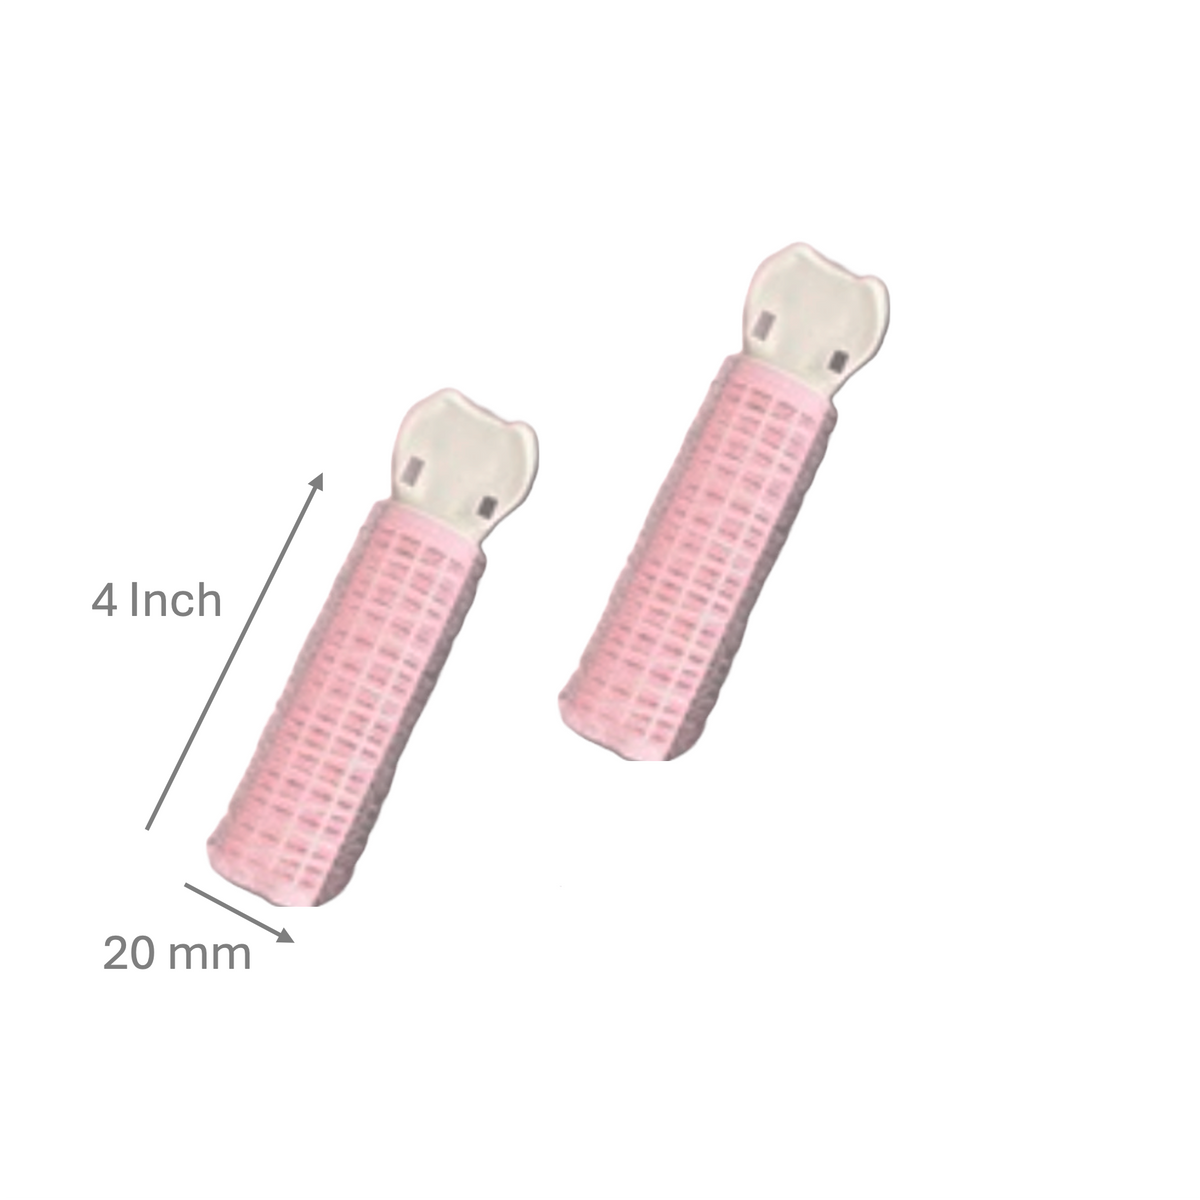 Hair Root Volume Clips For Fluffy Bangs & Natural Curls (2 Pack) HedeliE